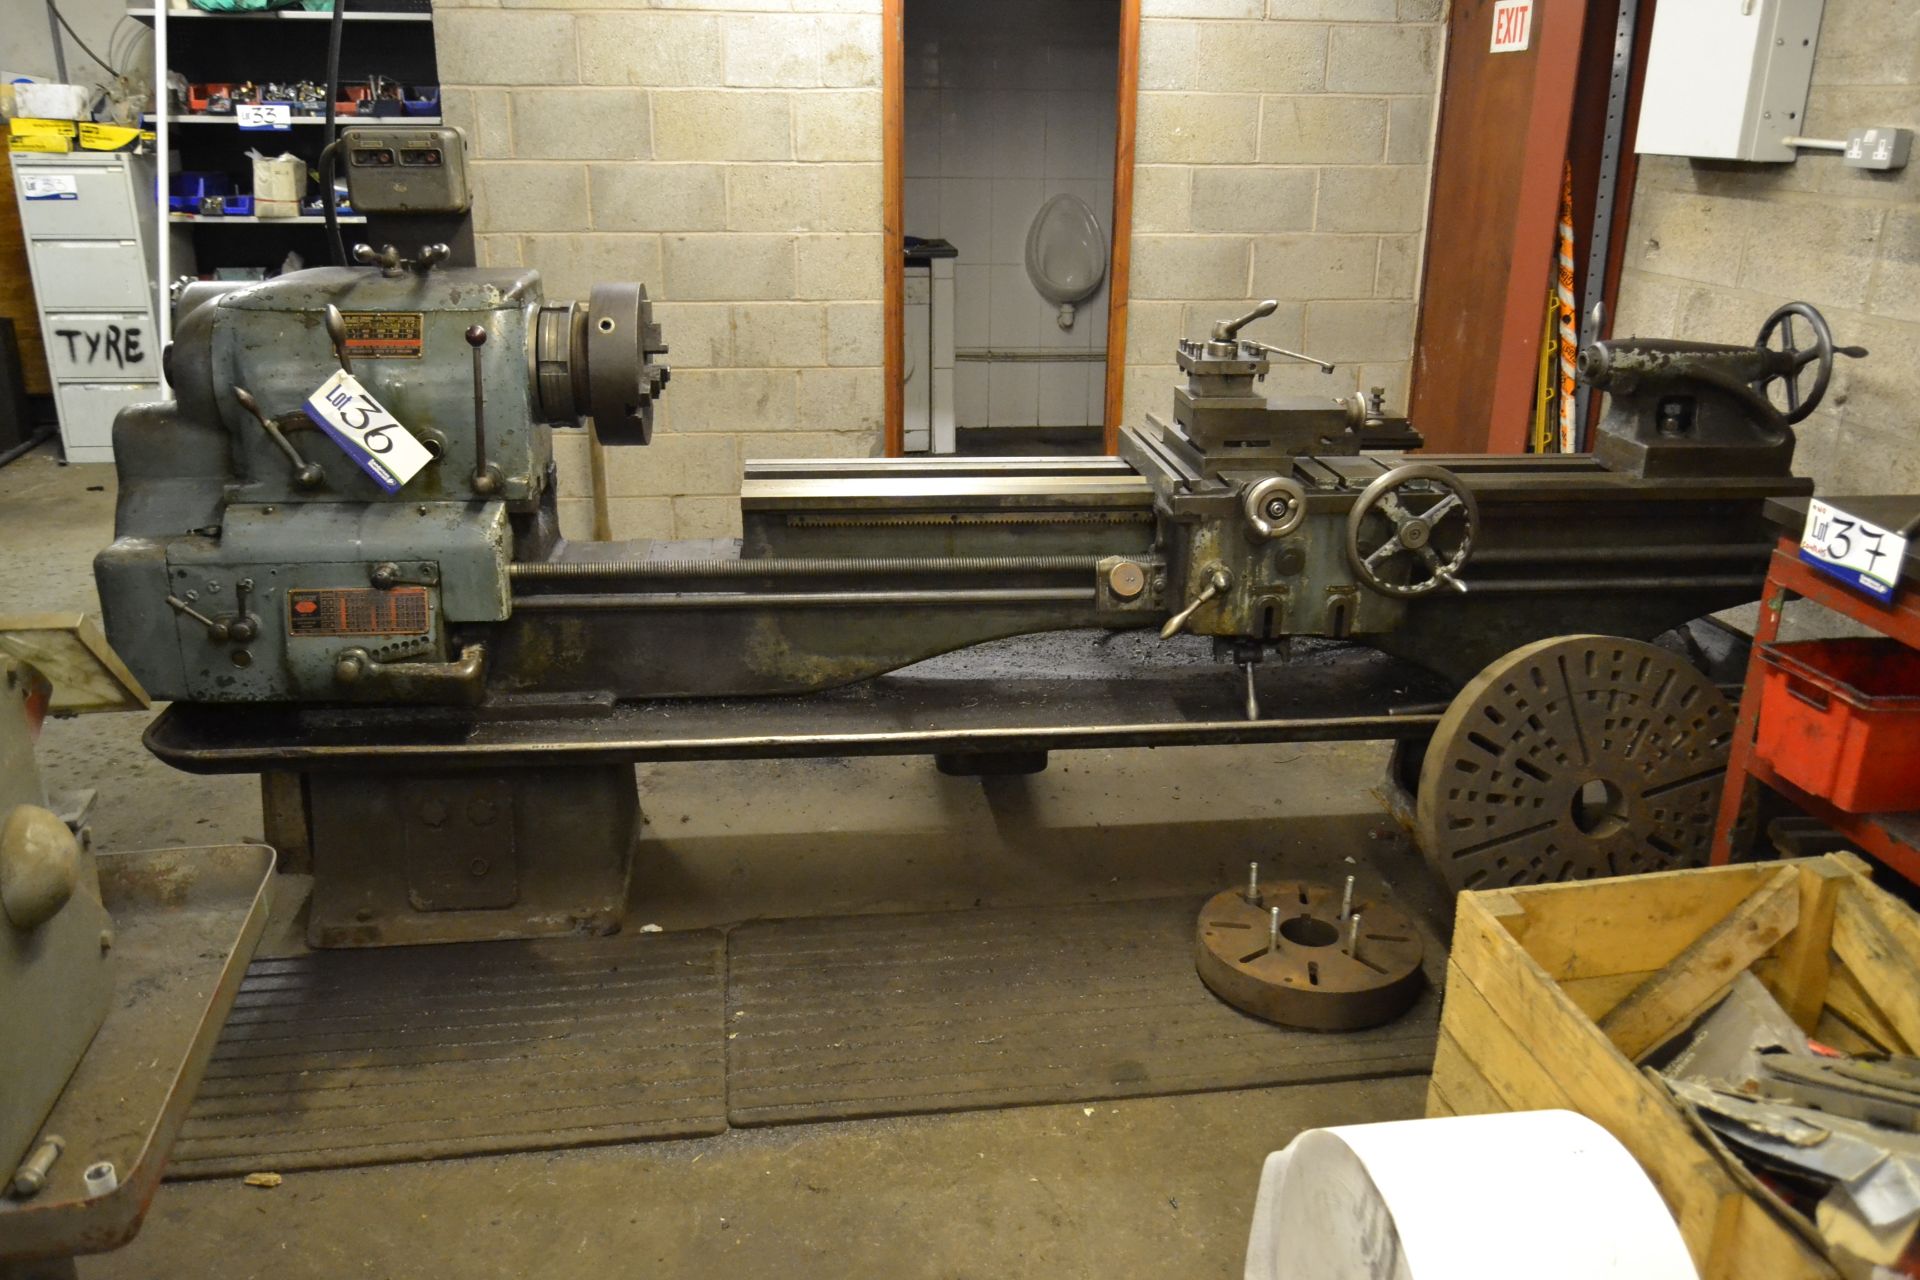 Colchester MASCOT 8½in. SLIDING SURFACING AND SCREW CUTTING GAP BED CENTRE LATHE, serial no.